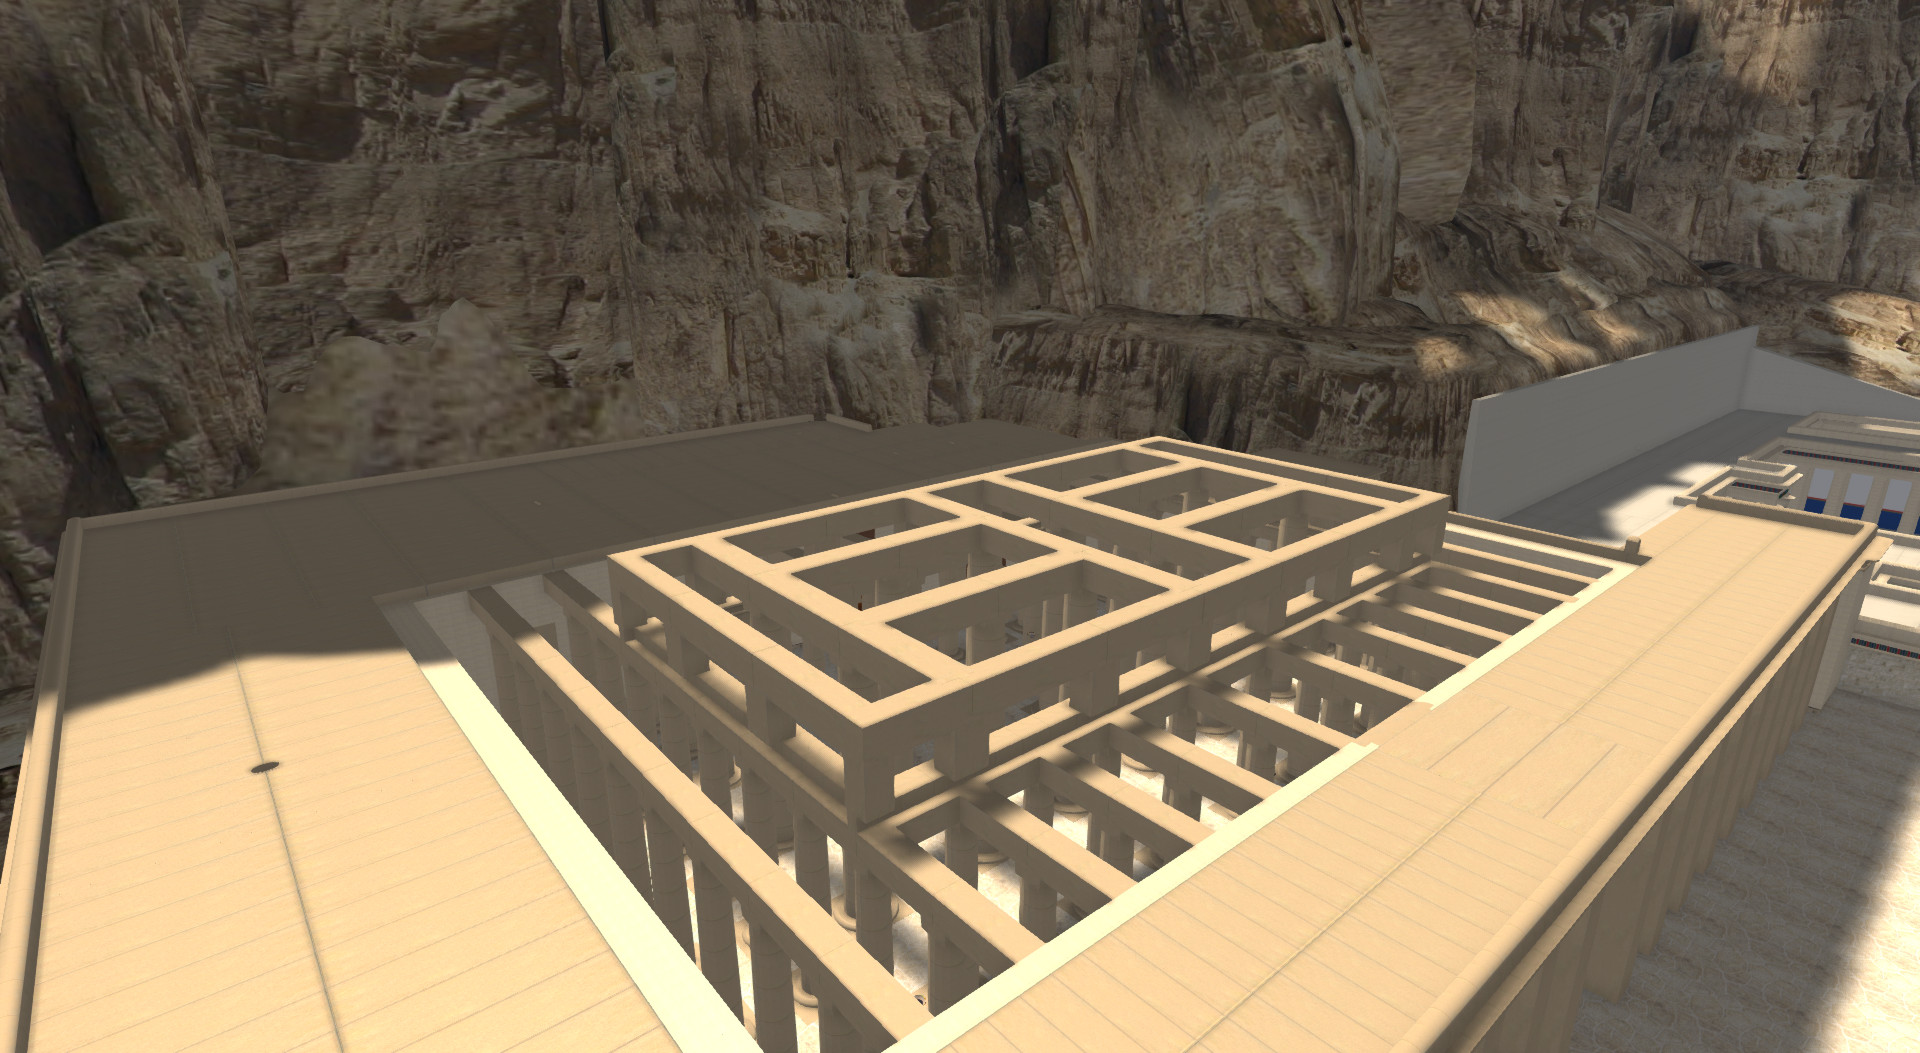 Thutmose III temple - Reconstruction due to new insights from Campaigns 2012-2013